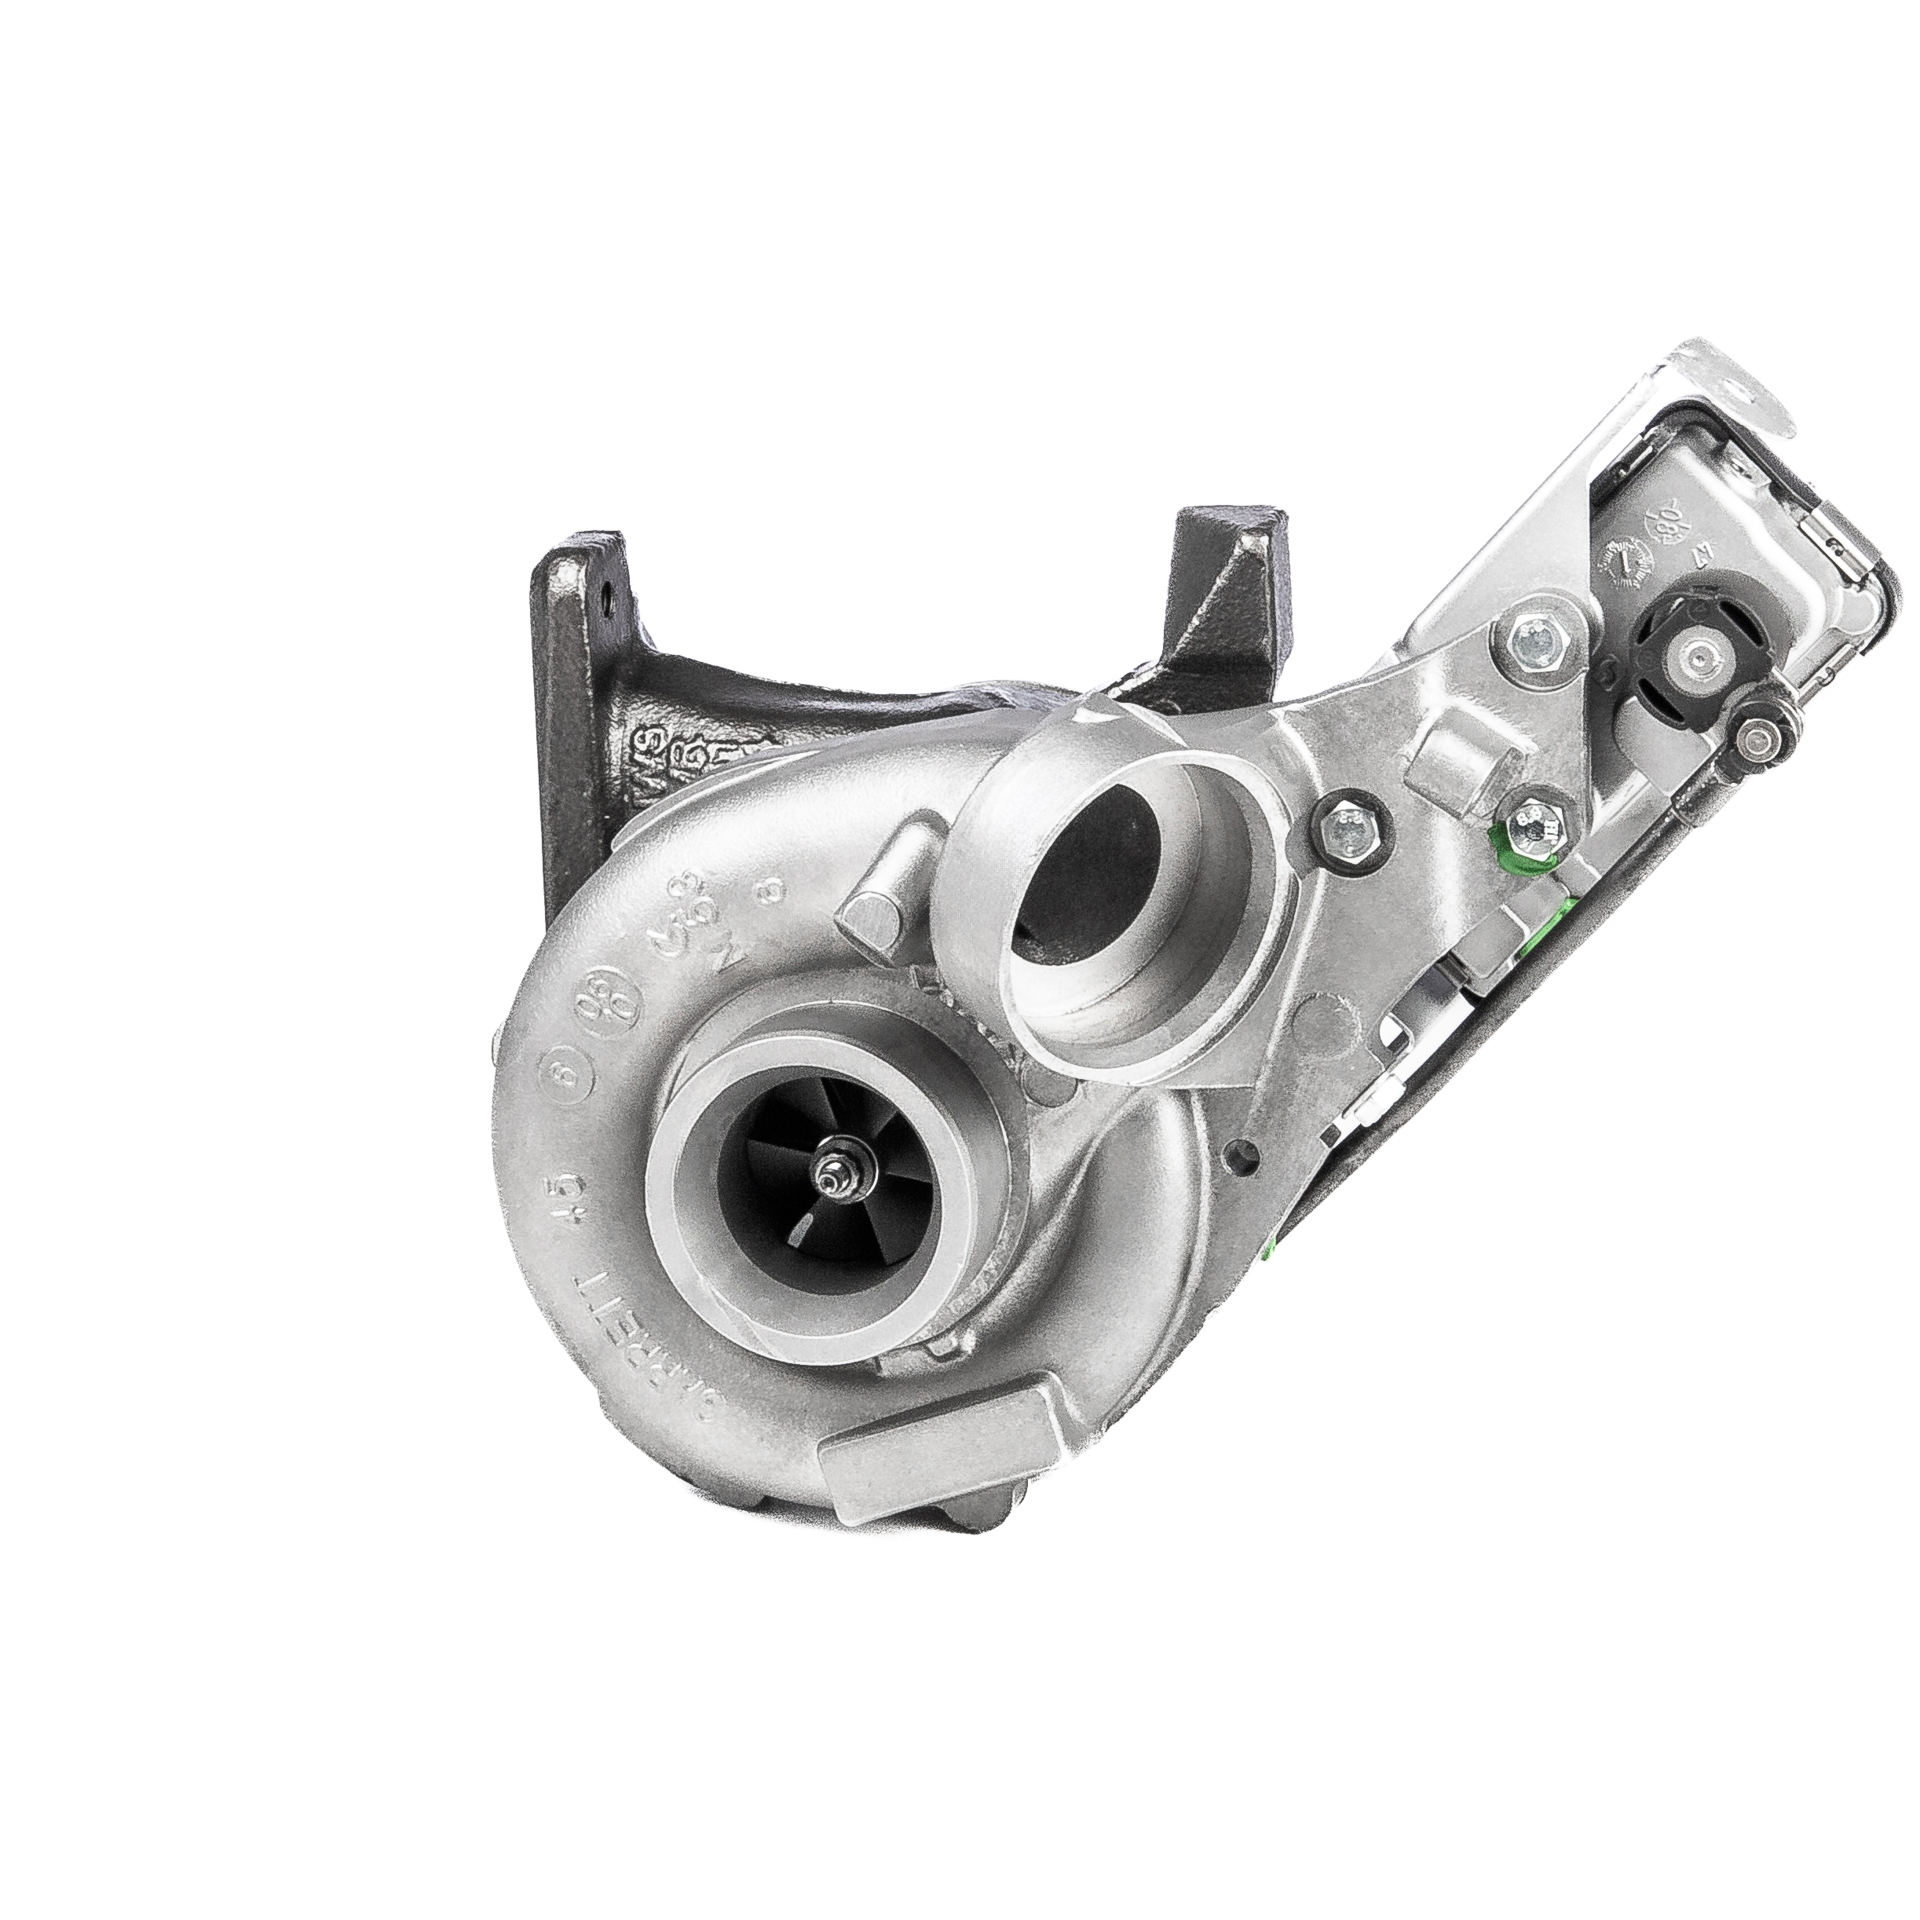 BR Turbo 742693-5001RS Turbocharger 7274610004